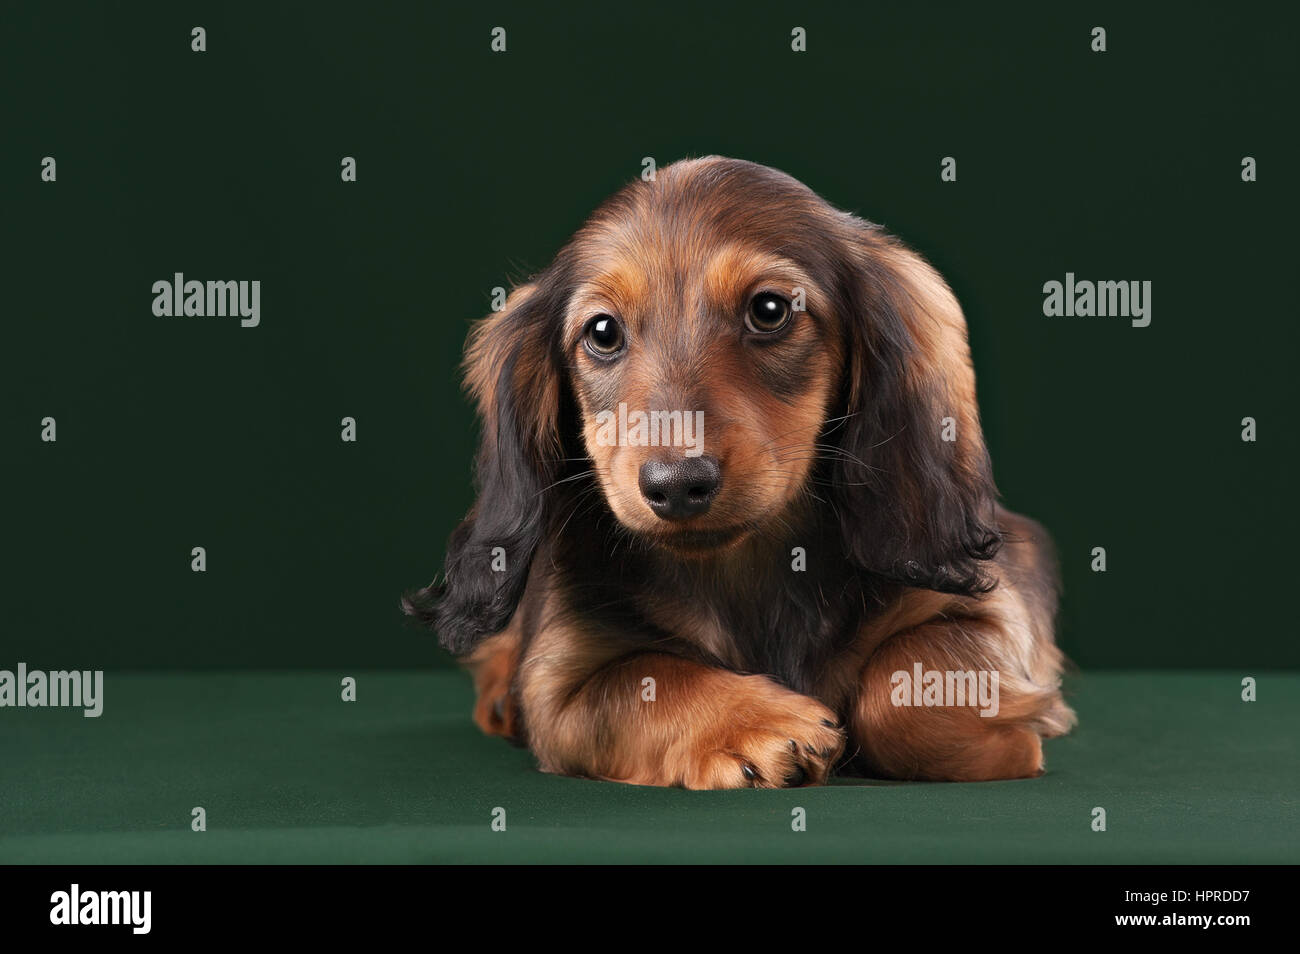 Healthy young longhaired dachshund dog puppy on green background in studio. Stock Photo